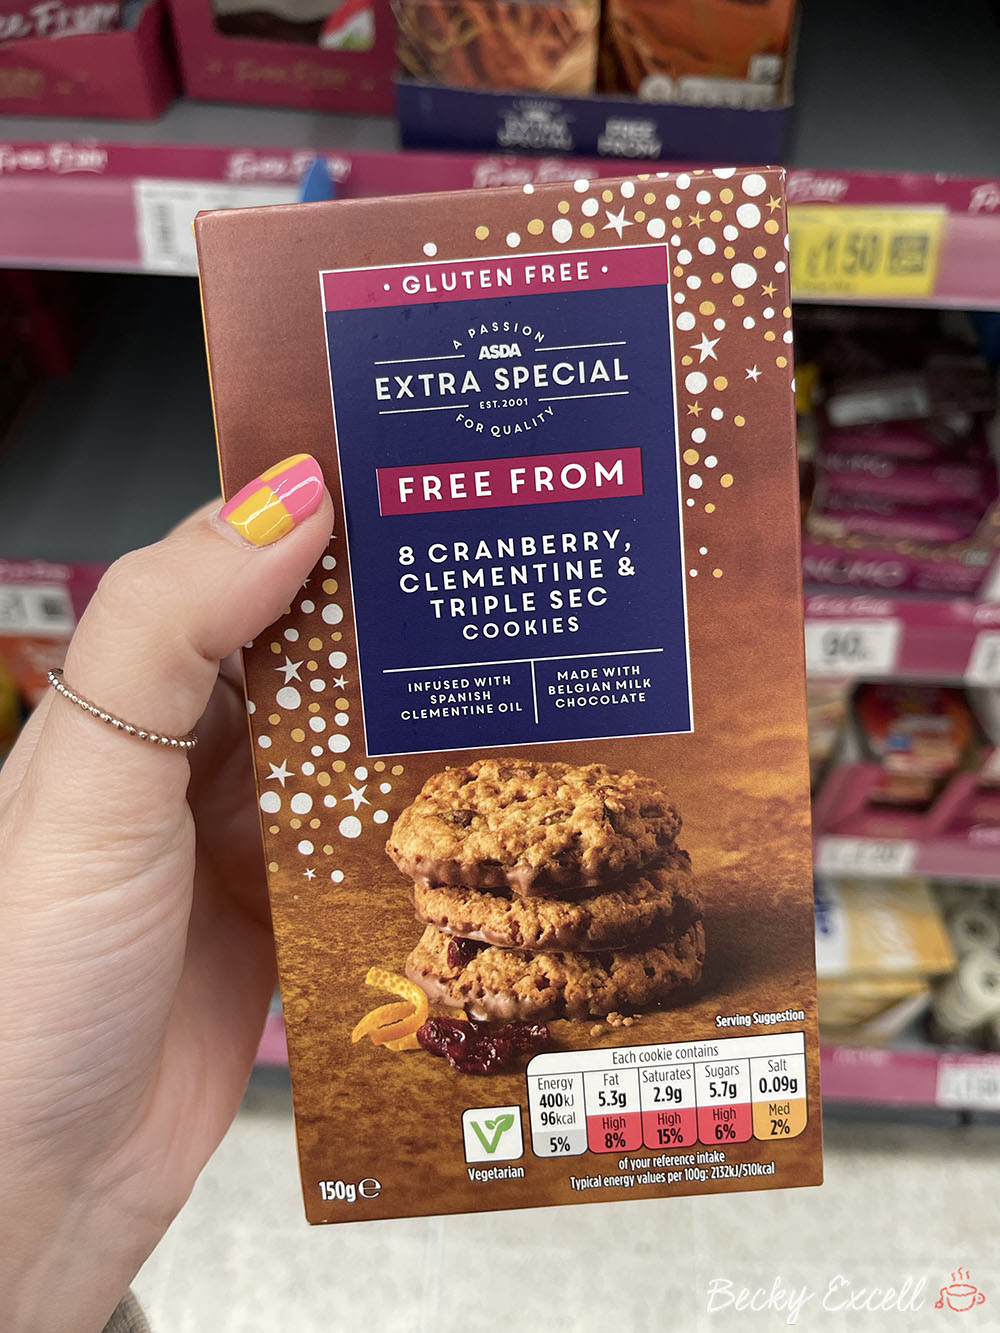 Asda's gluten-free Christmas products 2021: 8 cranberry, clementine and triple sec cookies